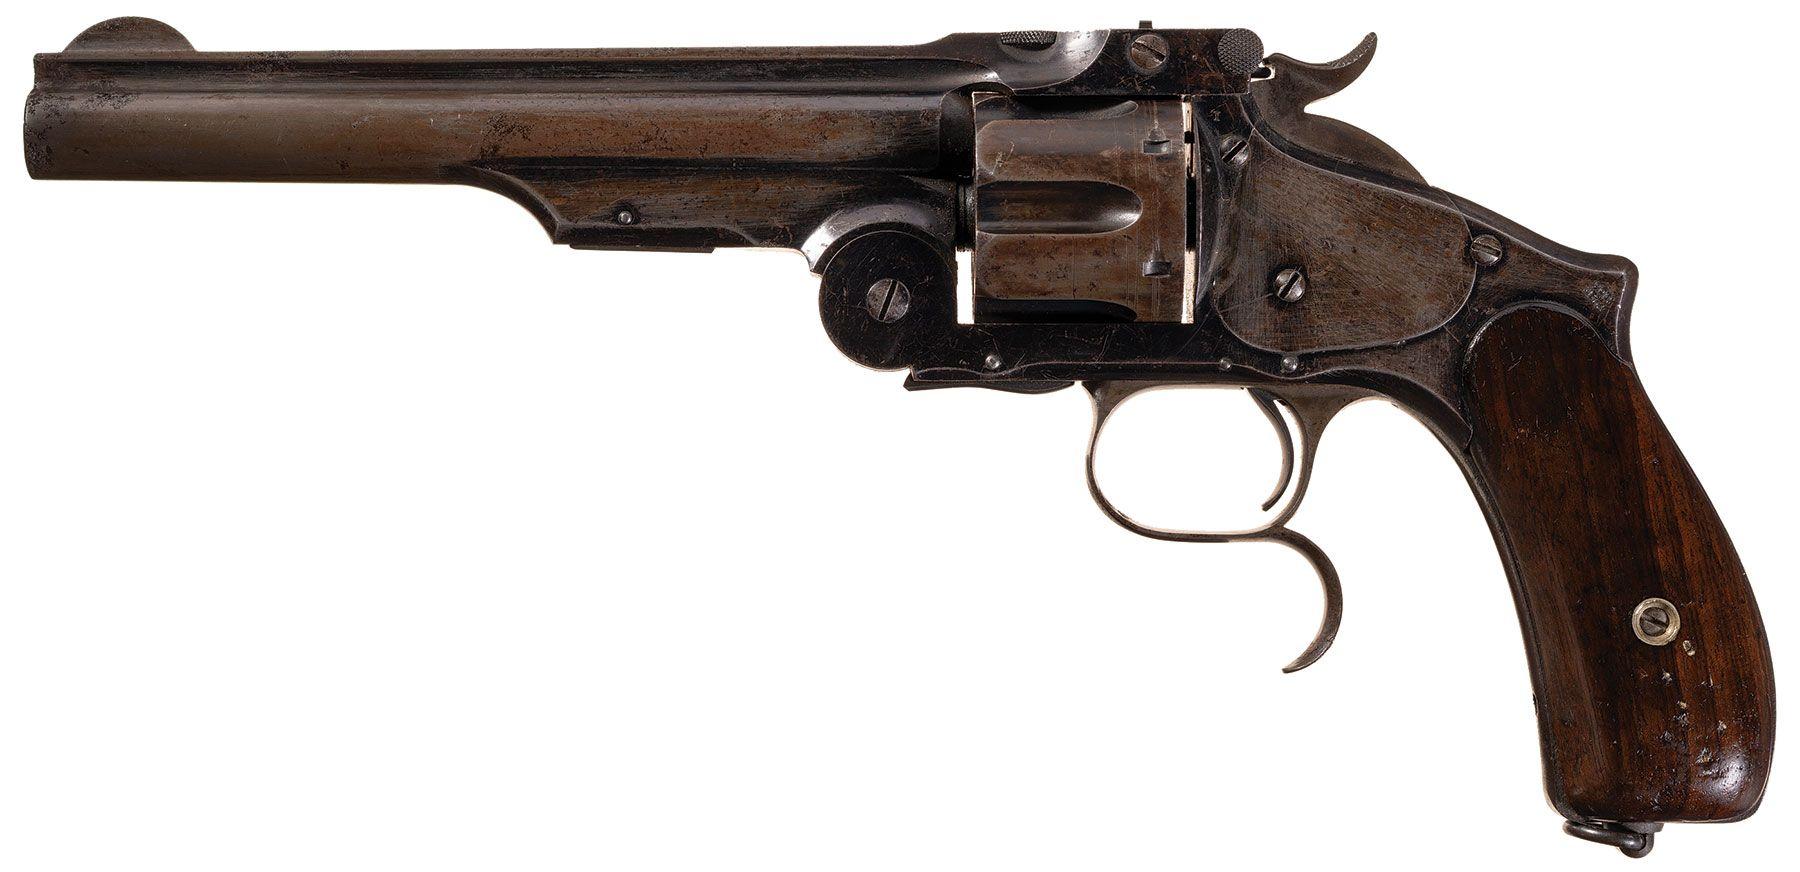 Russian Contract Ludwig Loewe S&W No. 3 Russian Revolver